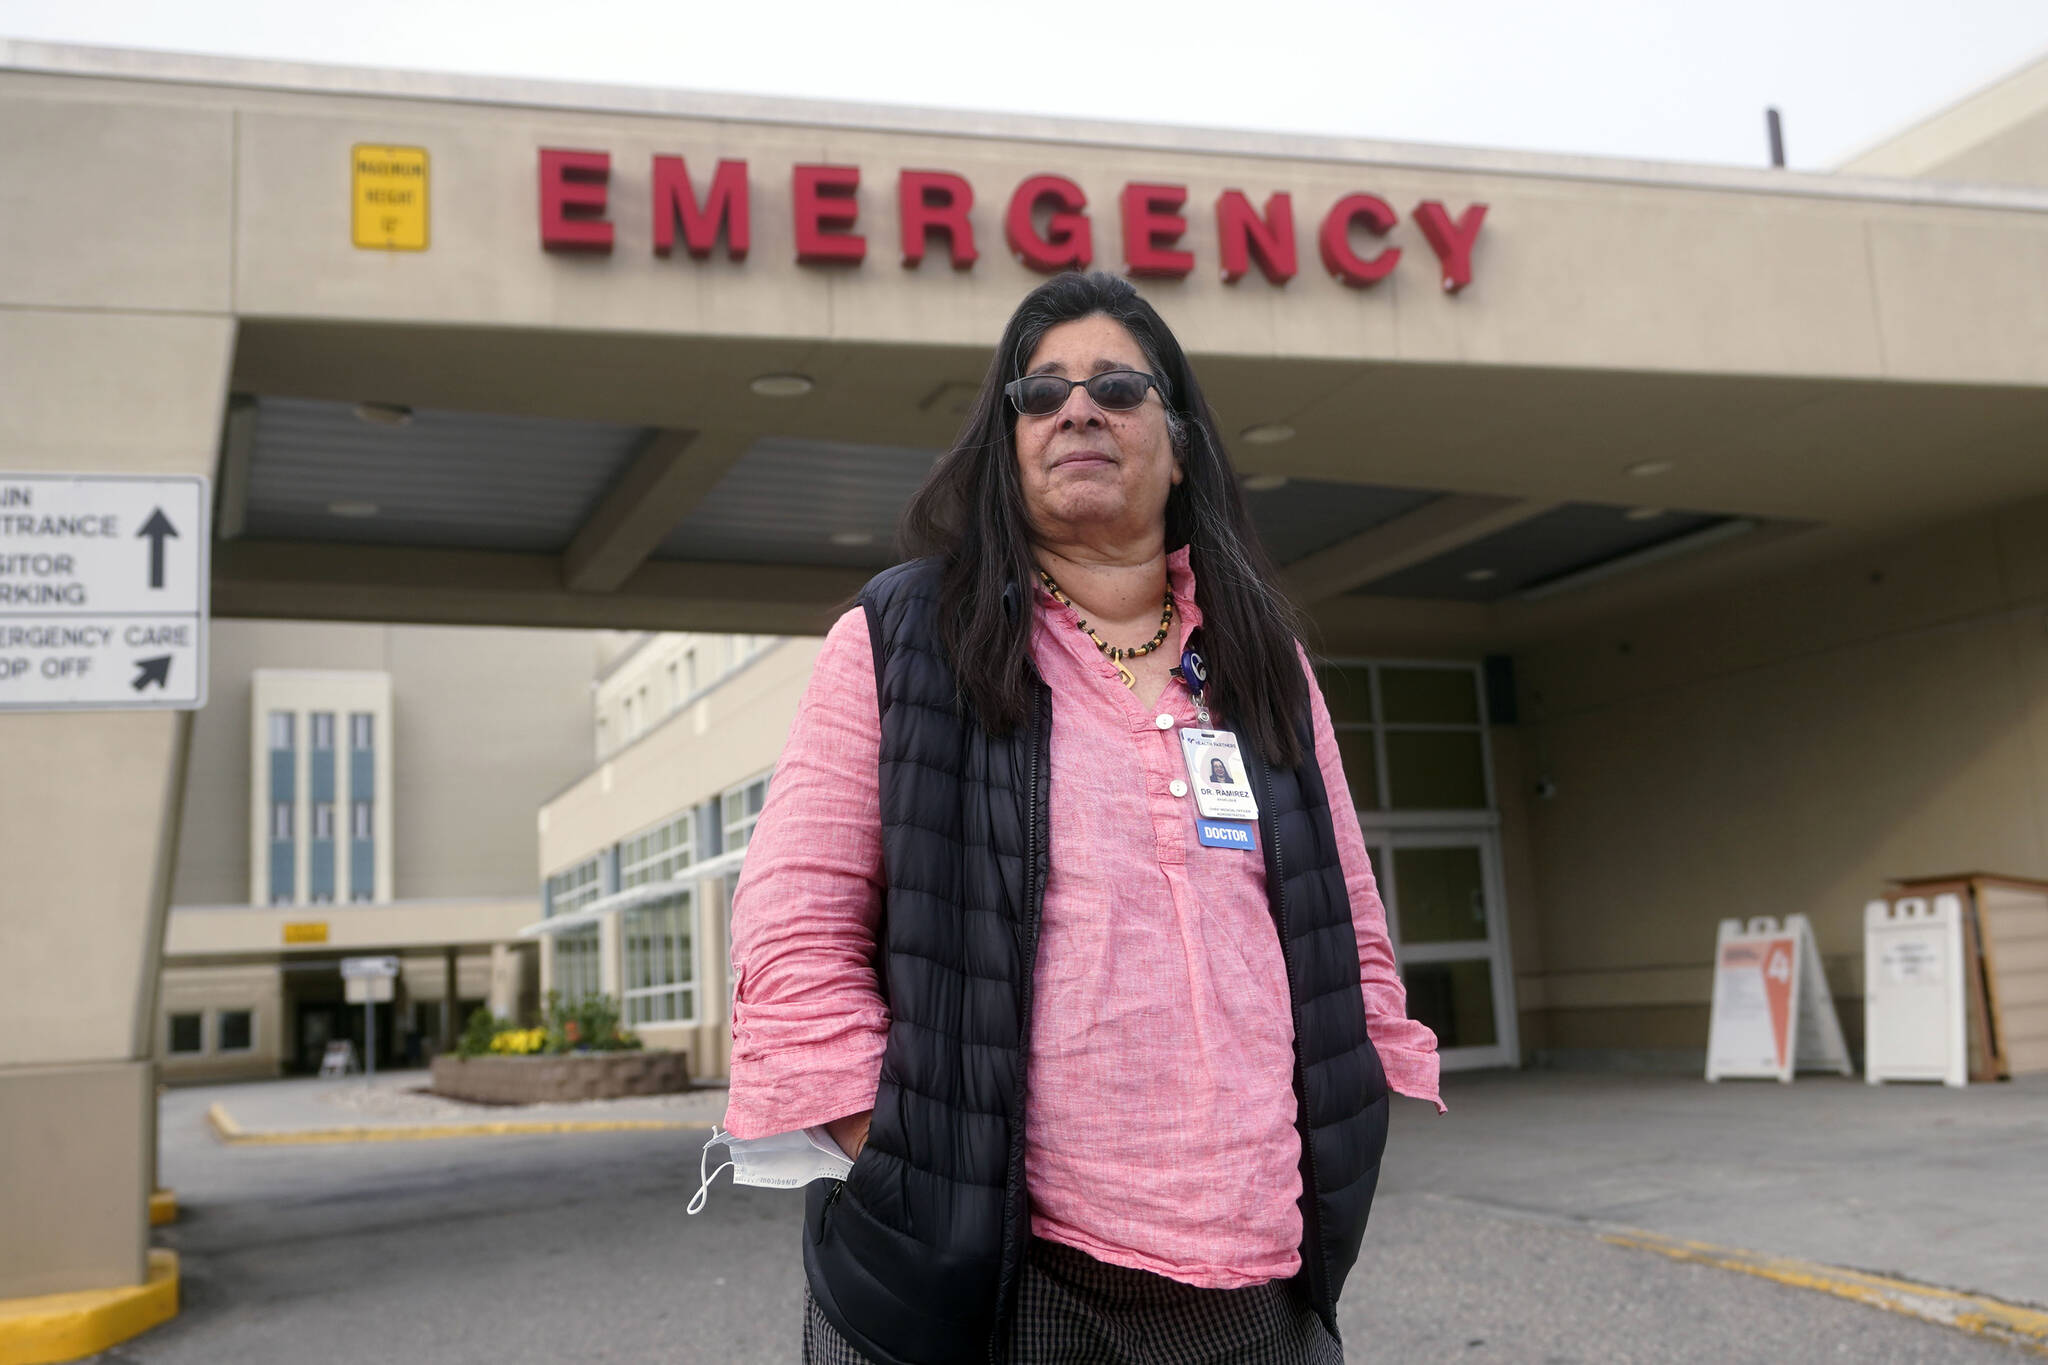 Angelique Ramirez, chief medical officer at Foundation Health Partners in Fairbanks, poses for a photograph in front of the emergency entrance at Fairbanks Memorial Hospital on Tuesday, Sept. 21, 2021, in Fairbanks, Alaska. Fairbanks Memorial Hospital on Friday, Oct. 1, said it activated the Crisis Standards of Care policy because of a critical shortage of bed capacity, staffing and monoclonal antibody treatments, along with the inability to transfer patients to other facilities. (AP Photo/Rick Bowmer)